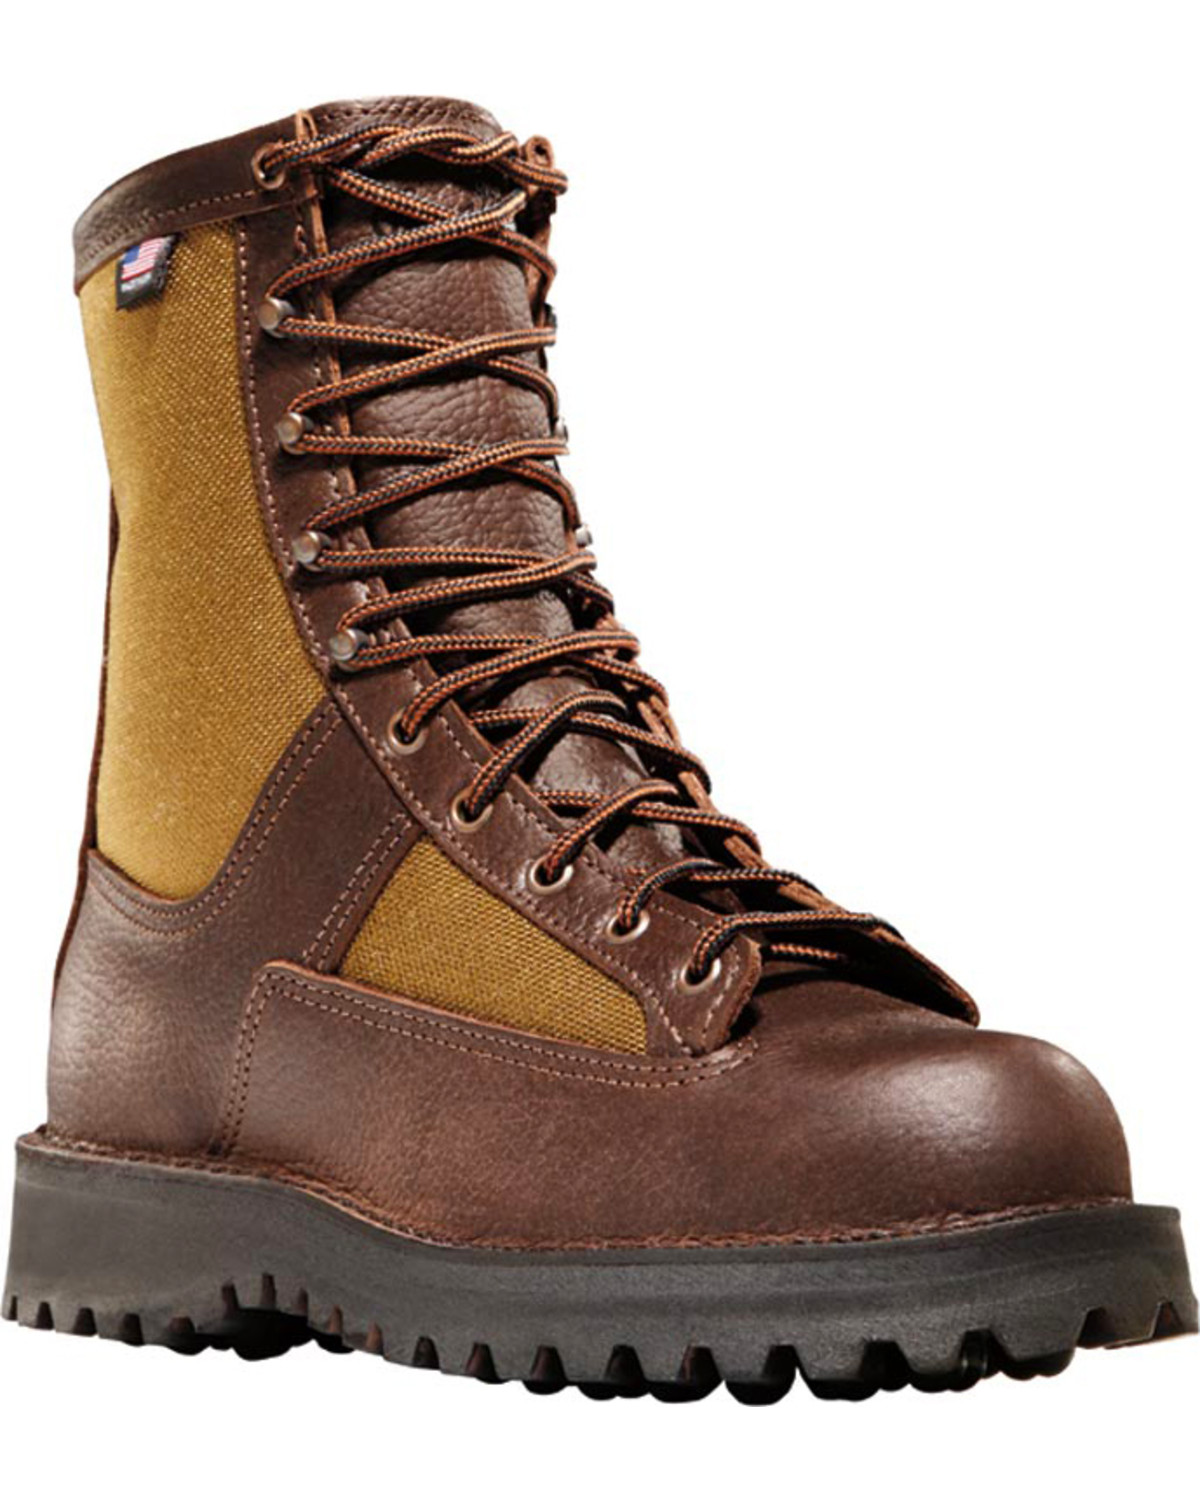 Danner Men's Grouse 8" Brown Hunting Boots